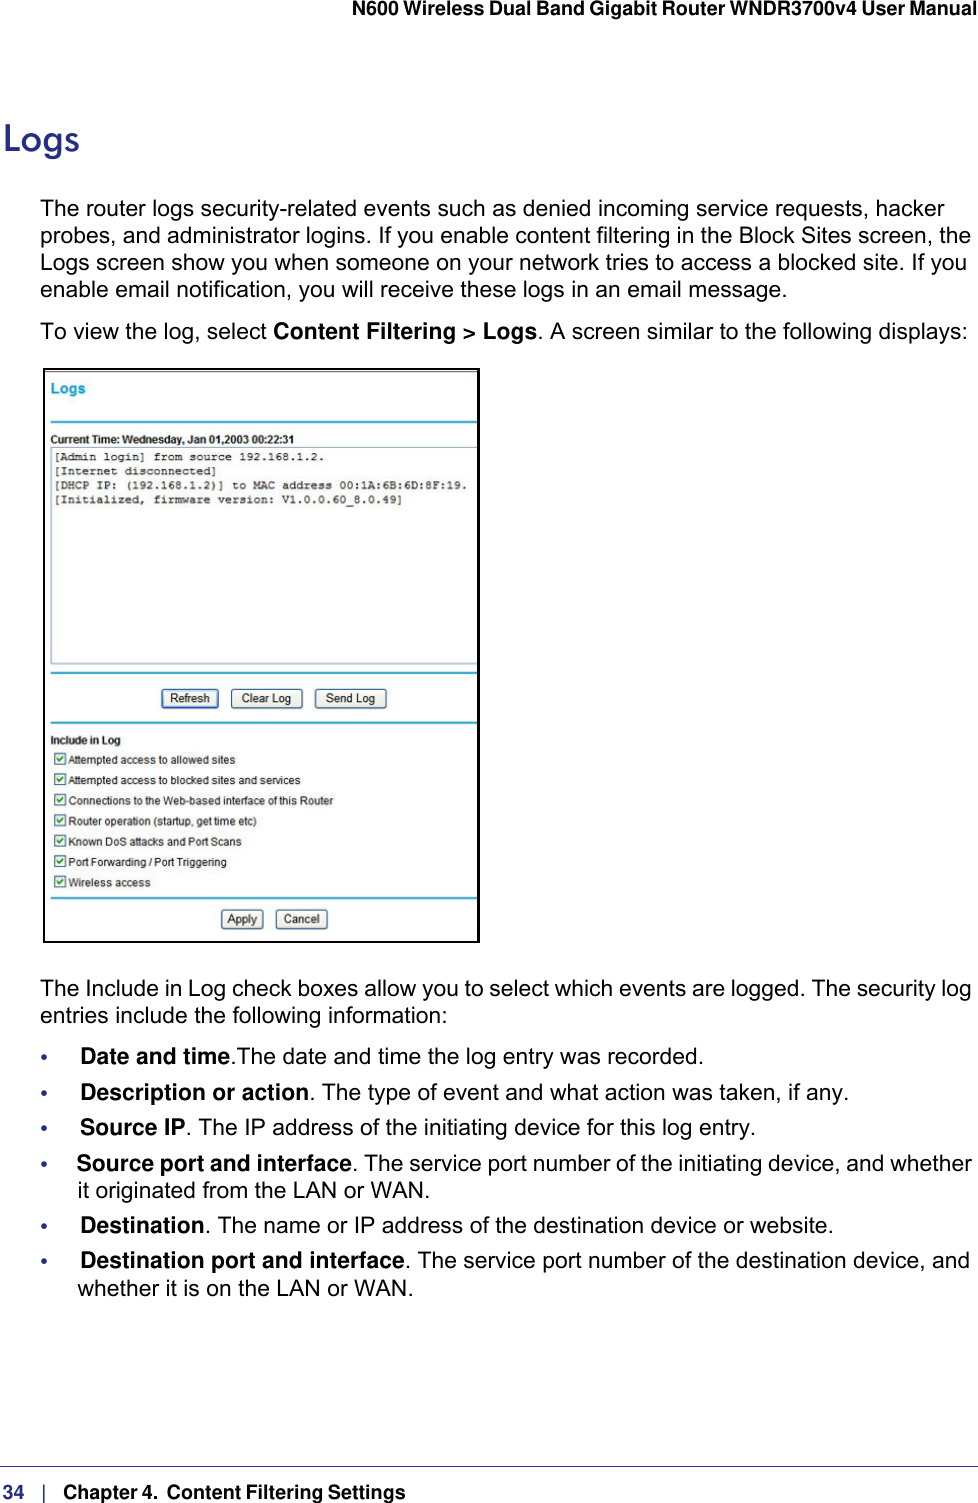 34   |   Chapter 4.  Content Filtering Settings  N600 Wireless Dual Band Gigabit Router WNDR3700v4 User Manual LogsThe router logs security-related events such as denied incoming service requests, hacker probes, and administrator logins. If you enable content filtering in the Block Sites screen, the Logs screen show you when someone on your network tries to access a blocked site. If you enable email notification, you will receive these logs in an email message. To view the log, select Content Filtering &gt; Logs. A screen similar to the following displays:The Include in Log check boxes allow you to select which events are logged. The security log entries include the following information:•     Date and time.The date and time the log entry was recorded.•     Description or action. The type of event and what action was taken, if any.•     Source IP. The IP address of the initiating device for this log entry.•     Source port and interface. The service port number of the initiating device, and whether it originated from the LAN or WAN.•     Destination. The name or IP address of the destination device or website.•     Destination port and interface. The service port number of the destination device, and whether it is on the LAN or WAN.